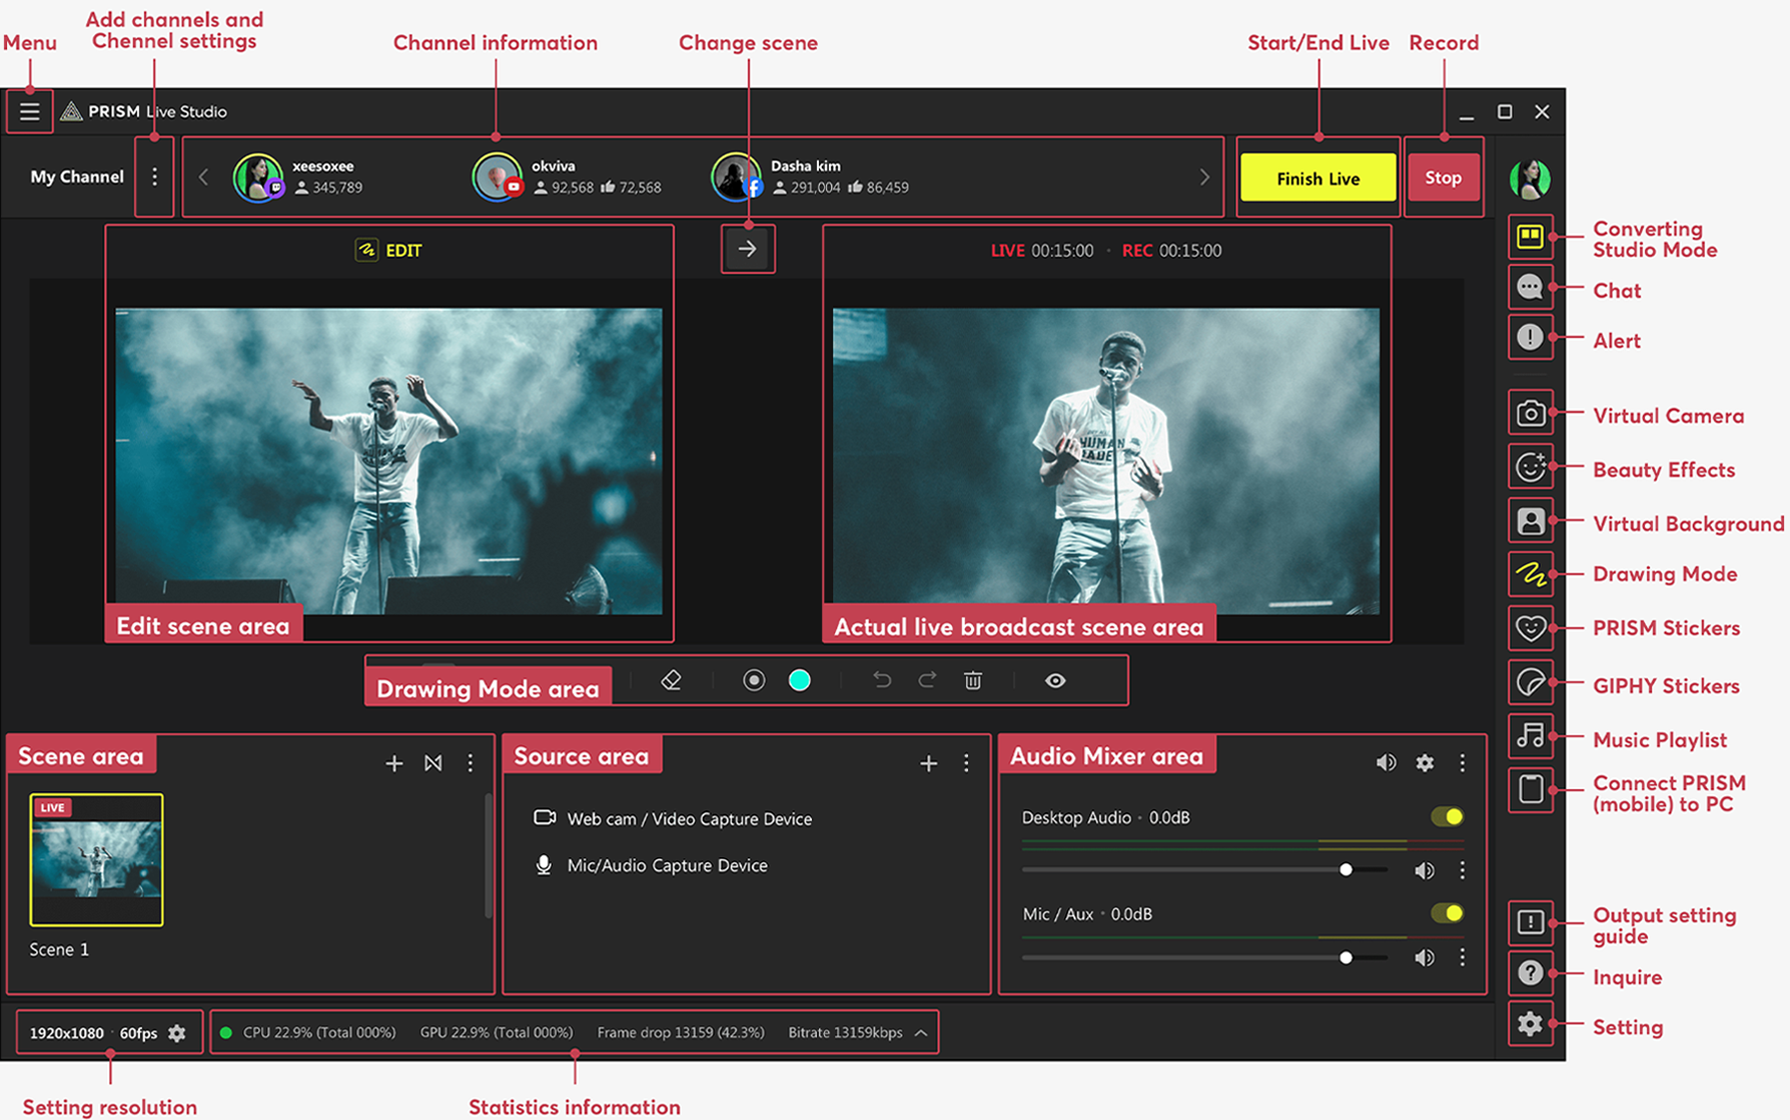 Main Screen Components: Menu, Channel information, Start/end Live, Record, Edit scene area, Change scene, Actual live broadcast scence area, Scene area, Source area, Audio Mixer area, Setting resolution, Statistics information, Converting Studio Mode, Chat, Alert, Inquiry, Setting